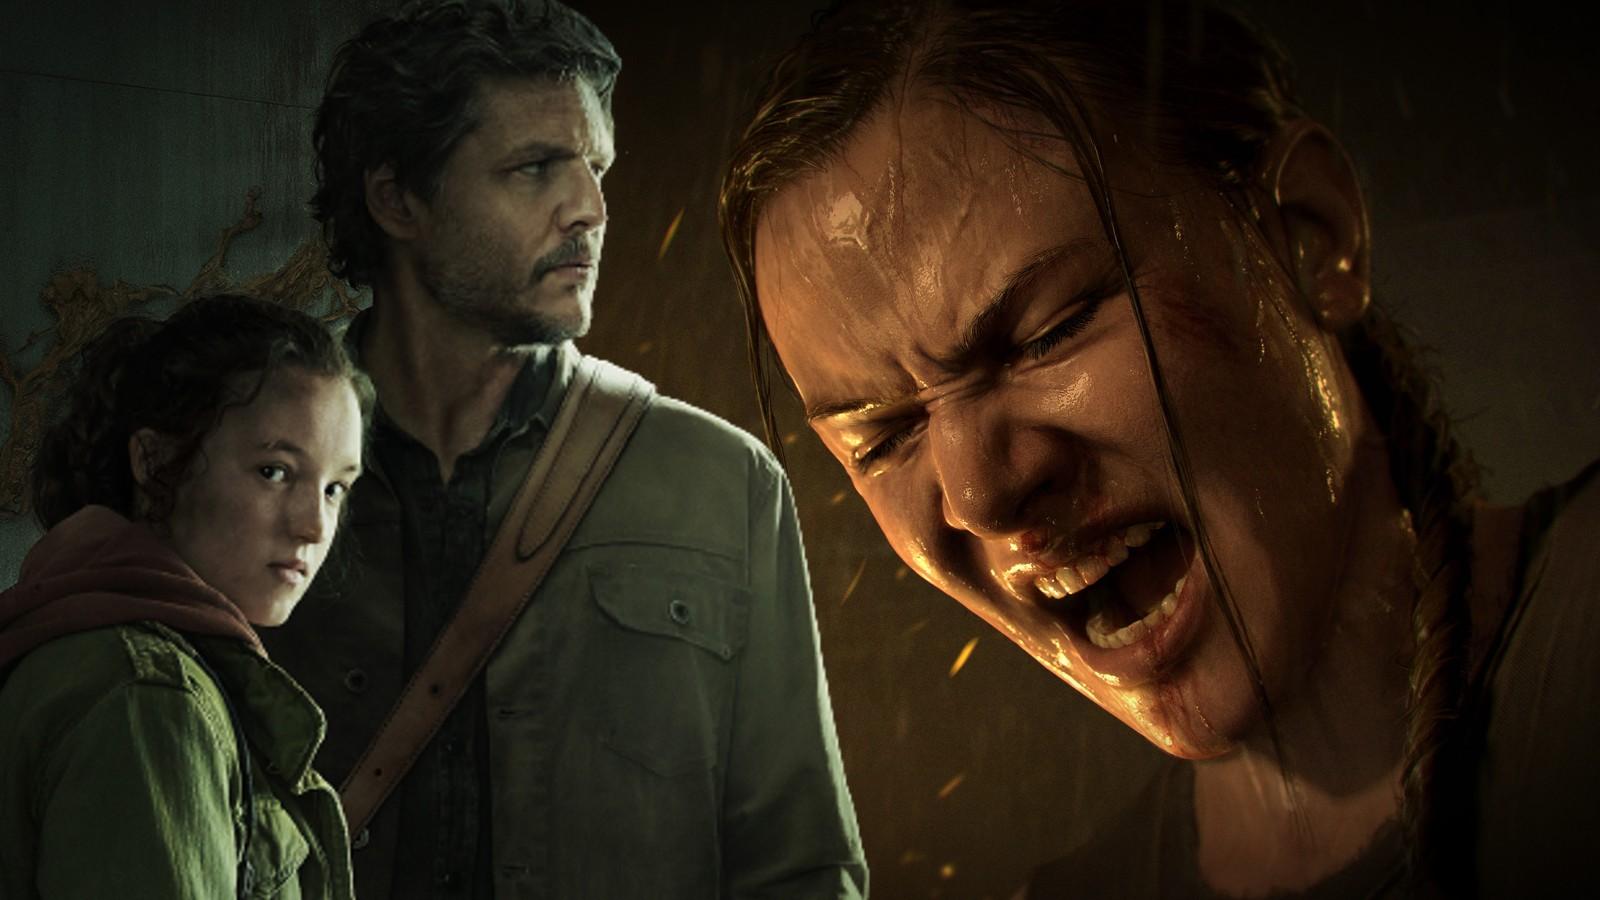 Pedro Pascal and Bella Ramsey in HBO's The Last of Us and Abby in Part II